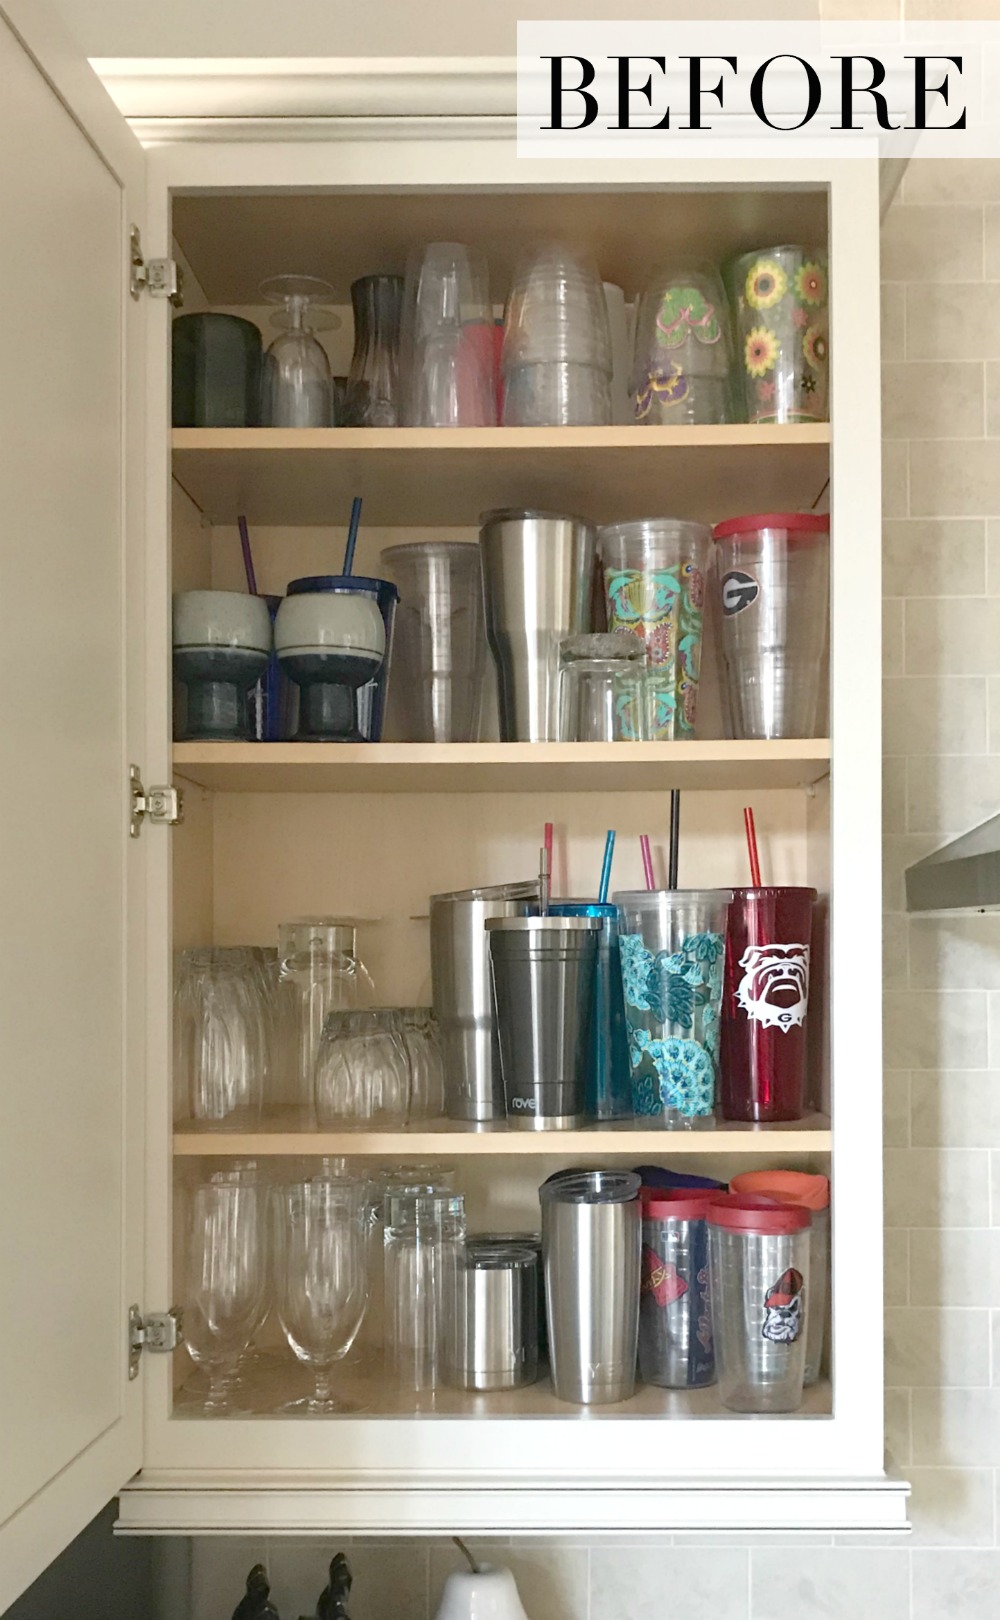 Before Organizing the Drinking Glasses and Cups